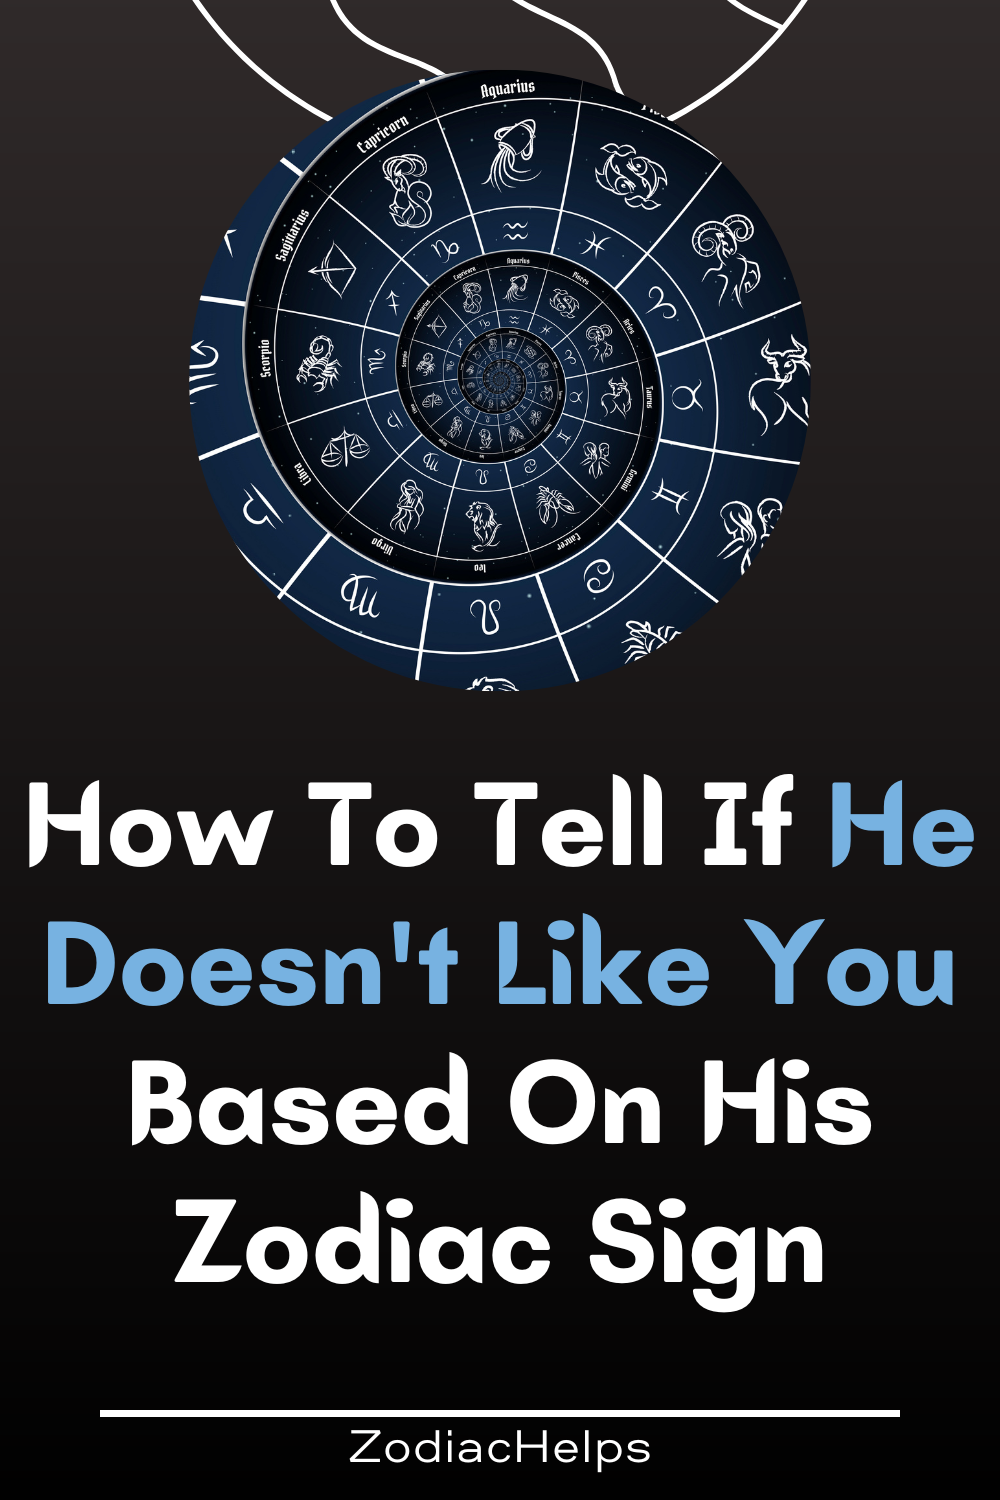 How To Tell If He Doesn't Like You Based On His Zodiac Sign